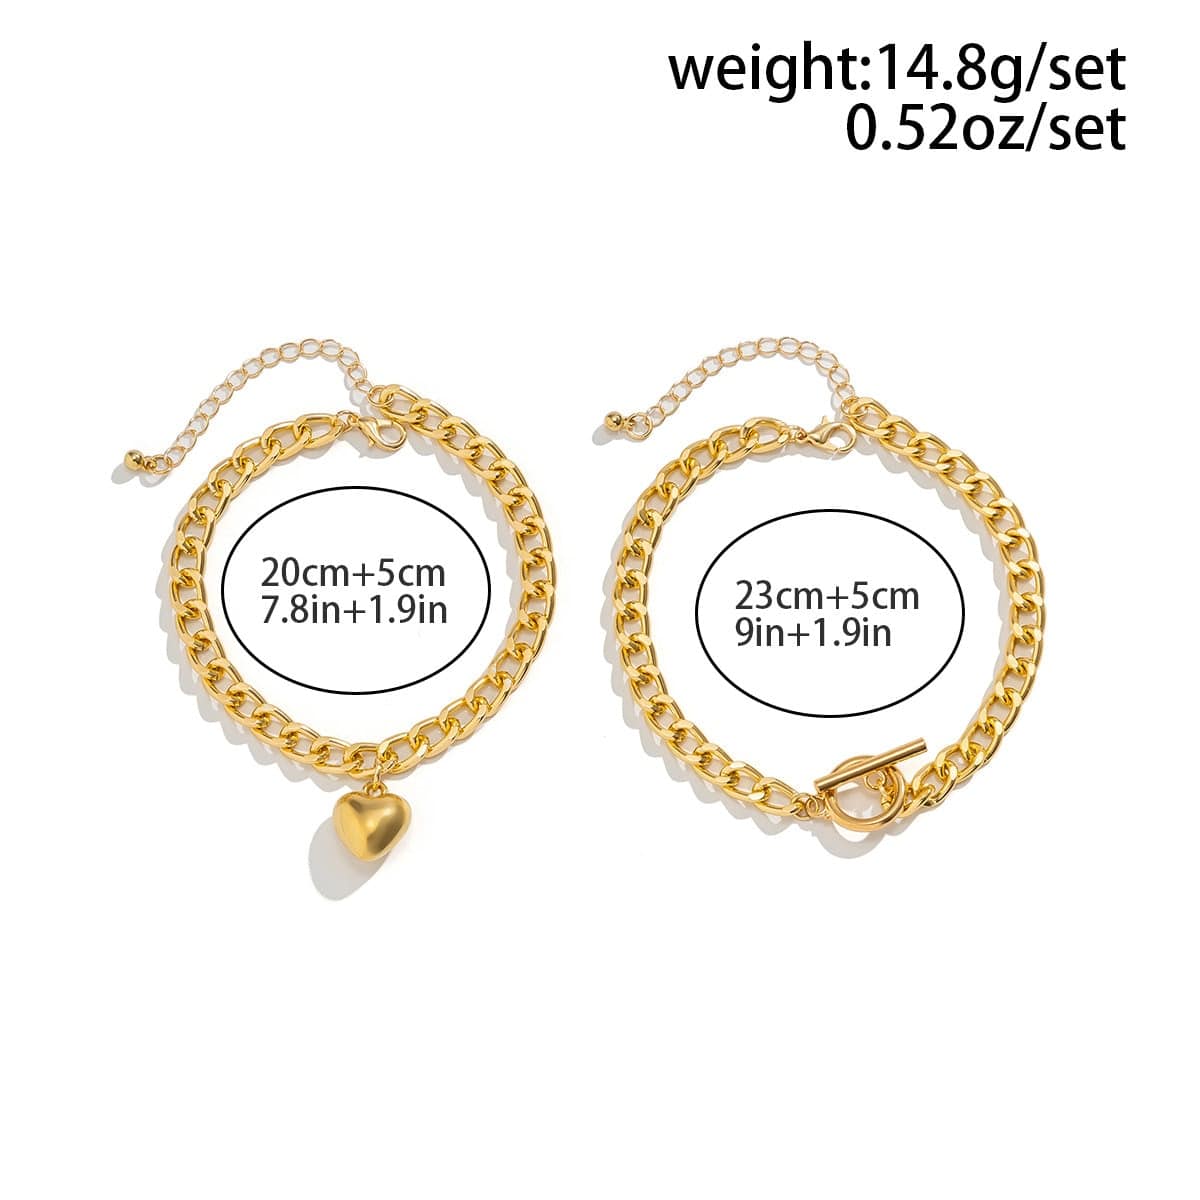 Geometric Layered Toggle Clasp Heart Charm Anklet Set